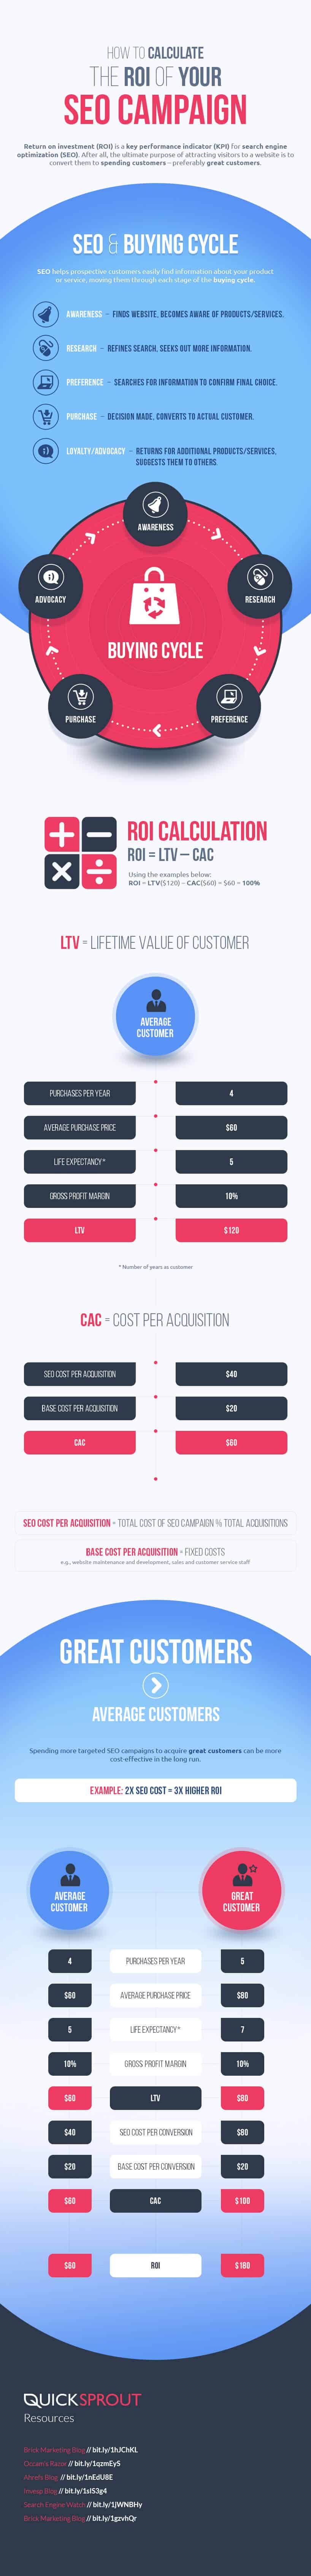 How to Calculate the ROI of Your SEO Campaign